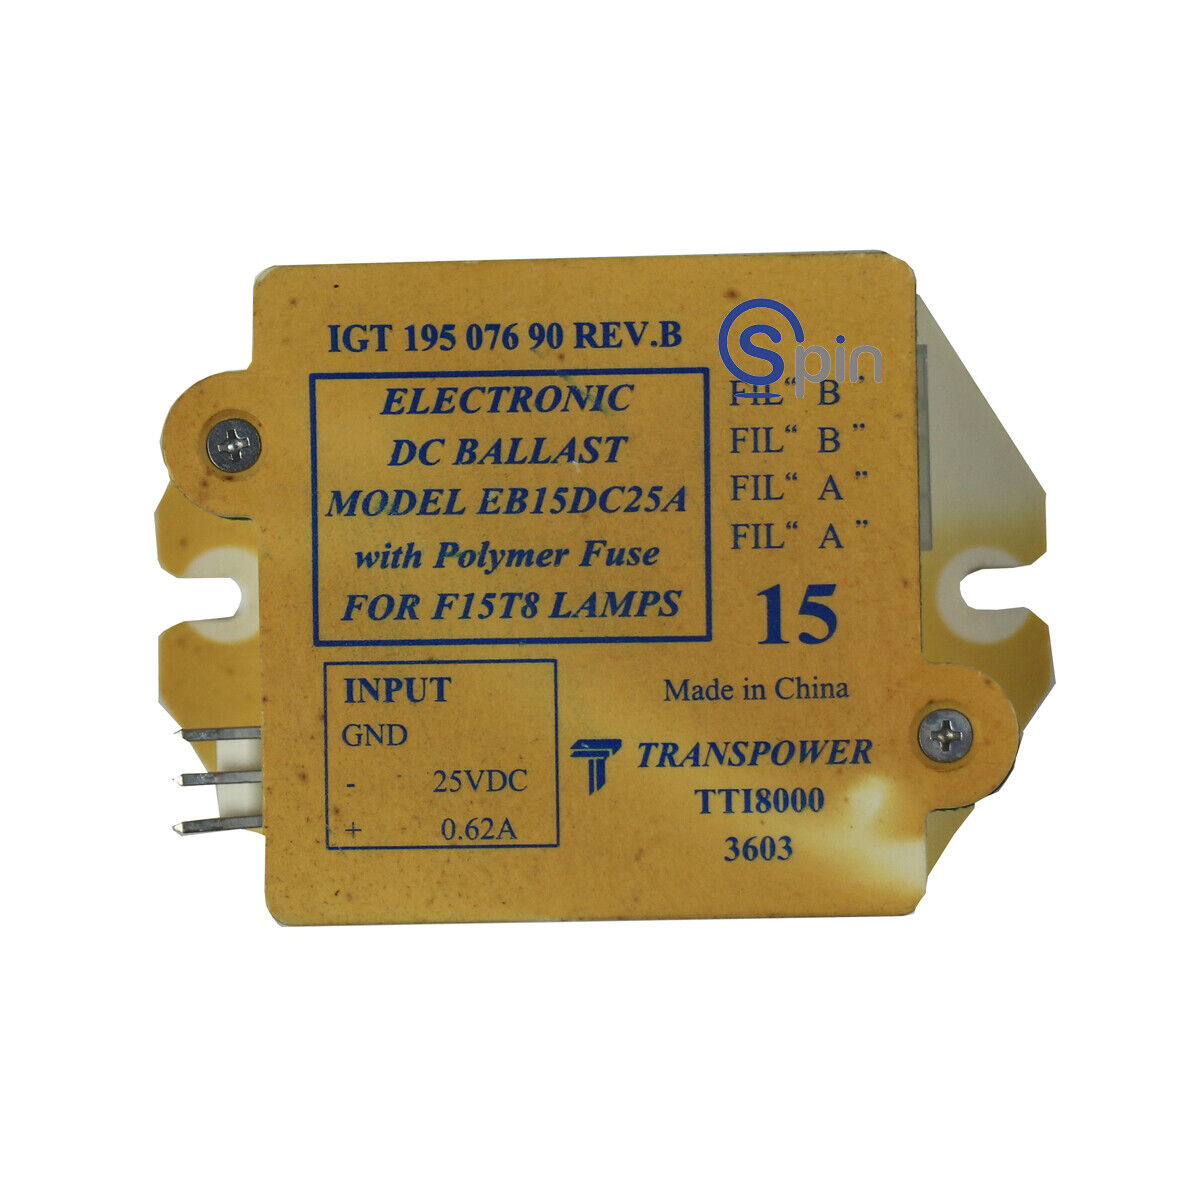 IGT Ballast With Polymer Fuse 25 Volts DC 15 Watt (195-076-90)